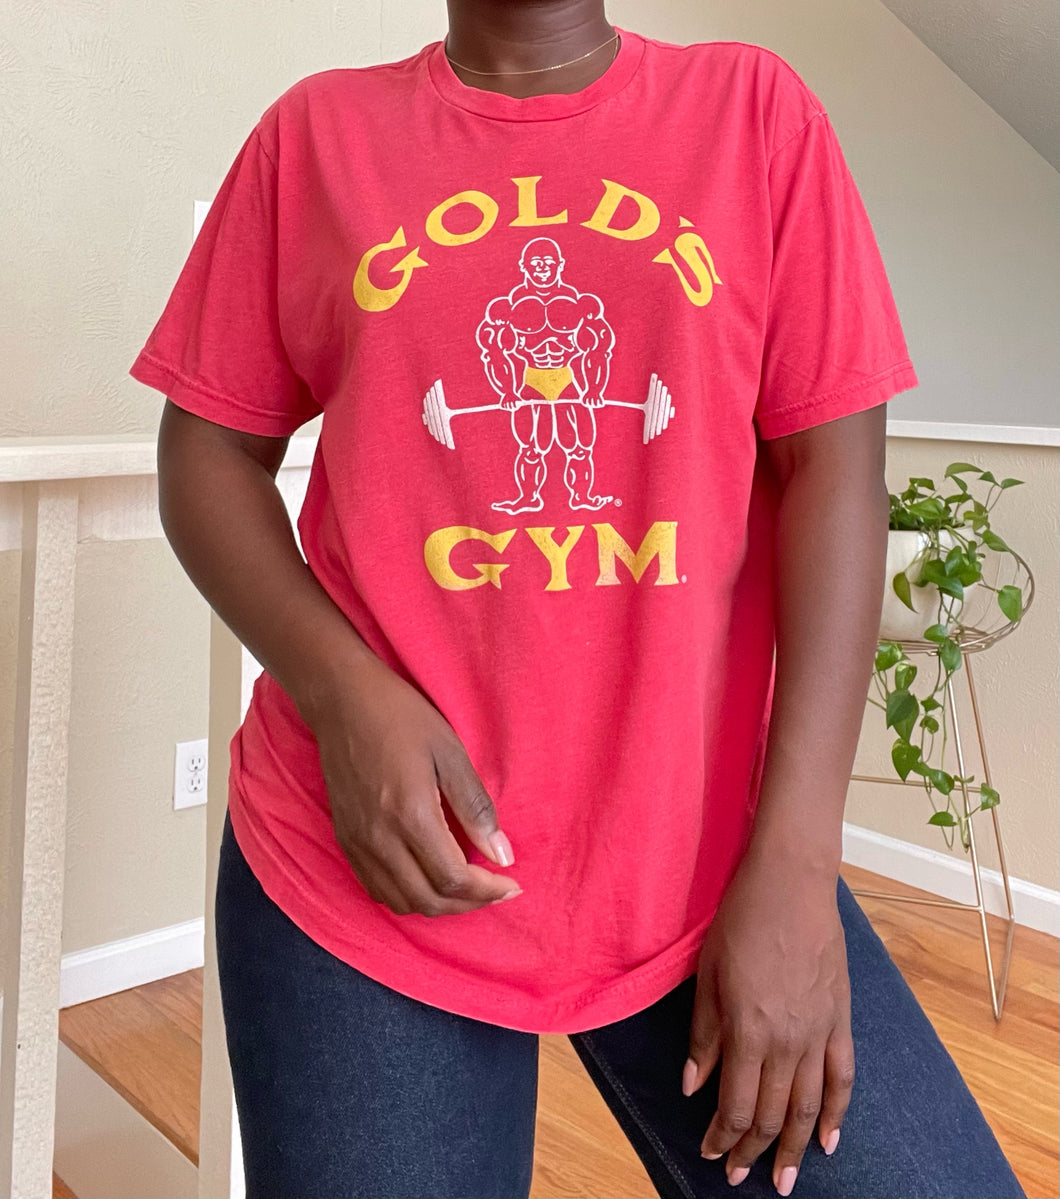 gold’s gym tee